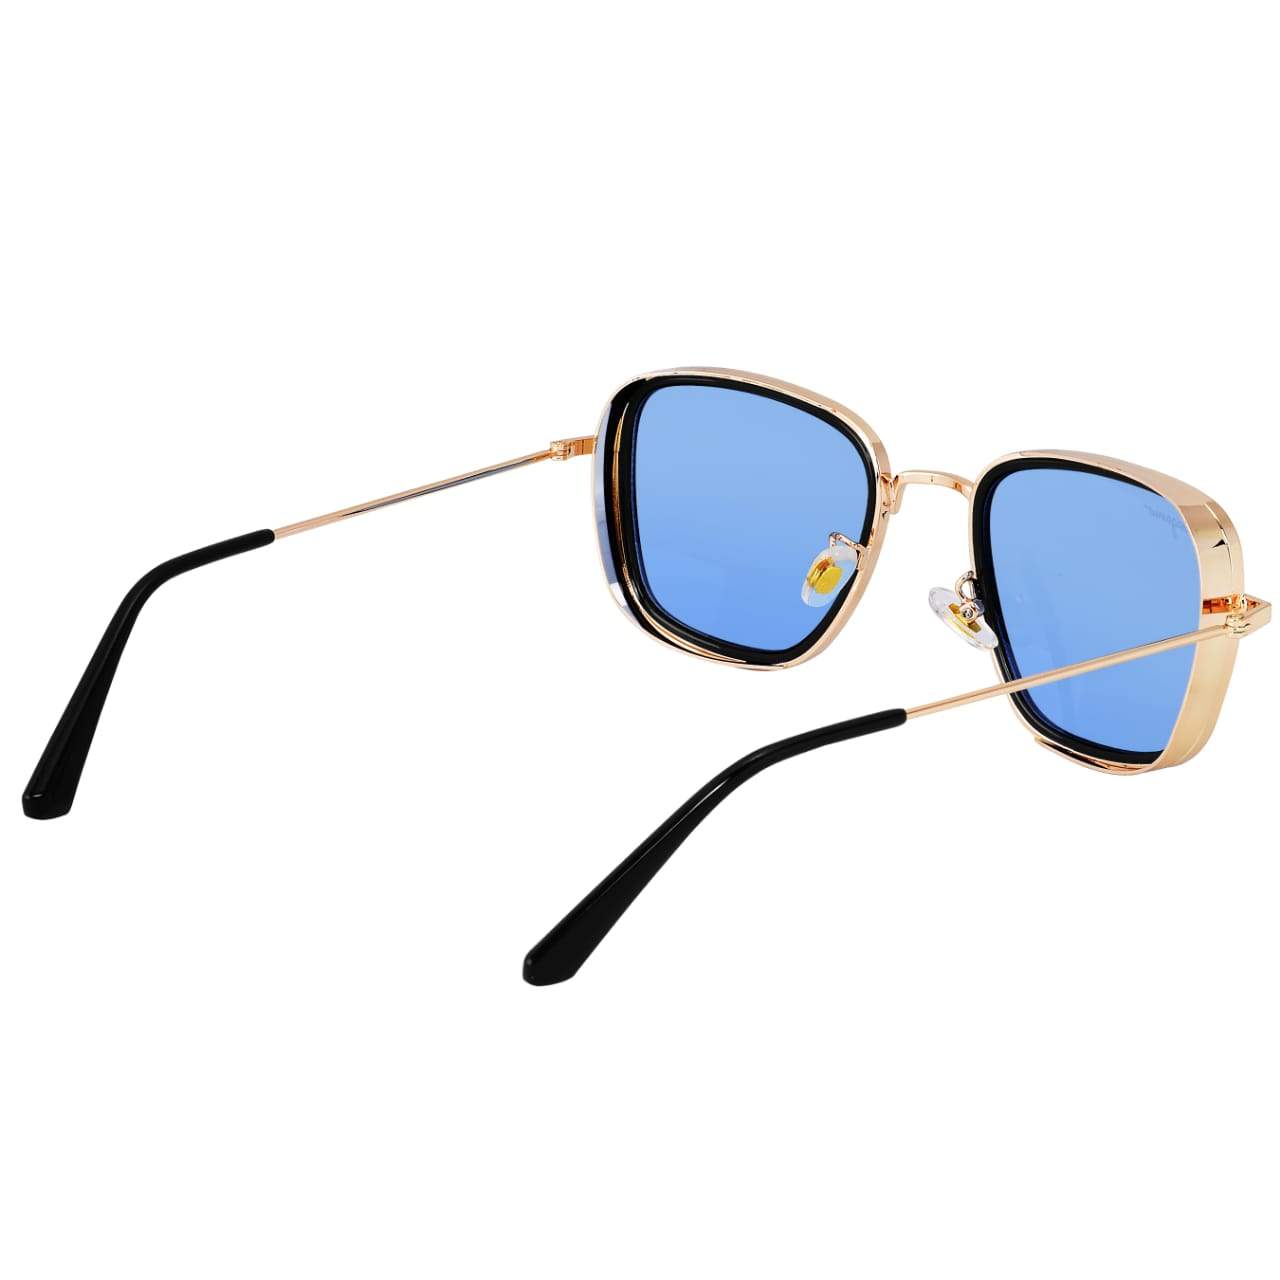 Stylish Square Blue Candy Sunglasses For Men And Women-Unique and Classy